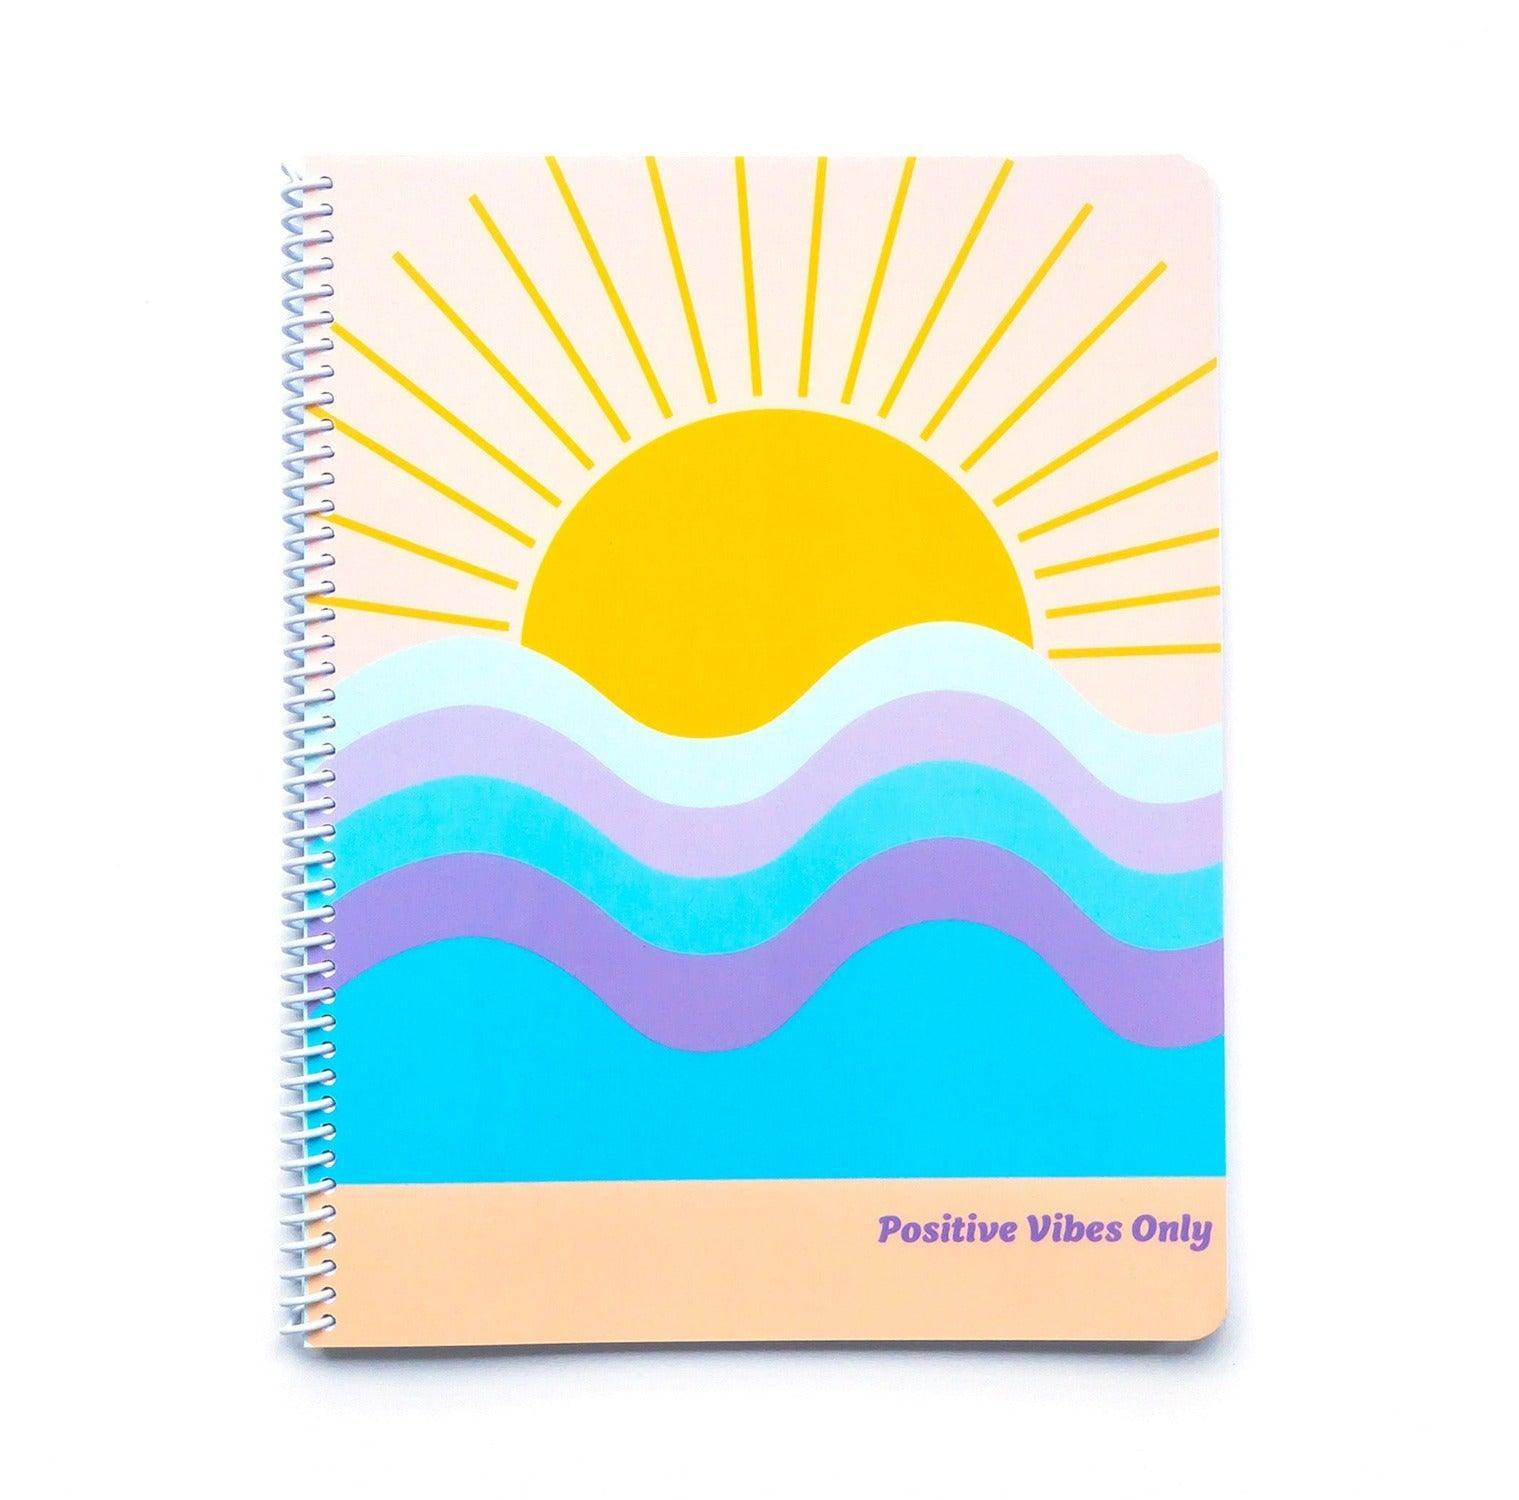 Positive Vibes Only Notebook - The front cover features a beautiful sun coming over the horizon at the beach with phrase Positive Vibes Only.